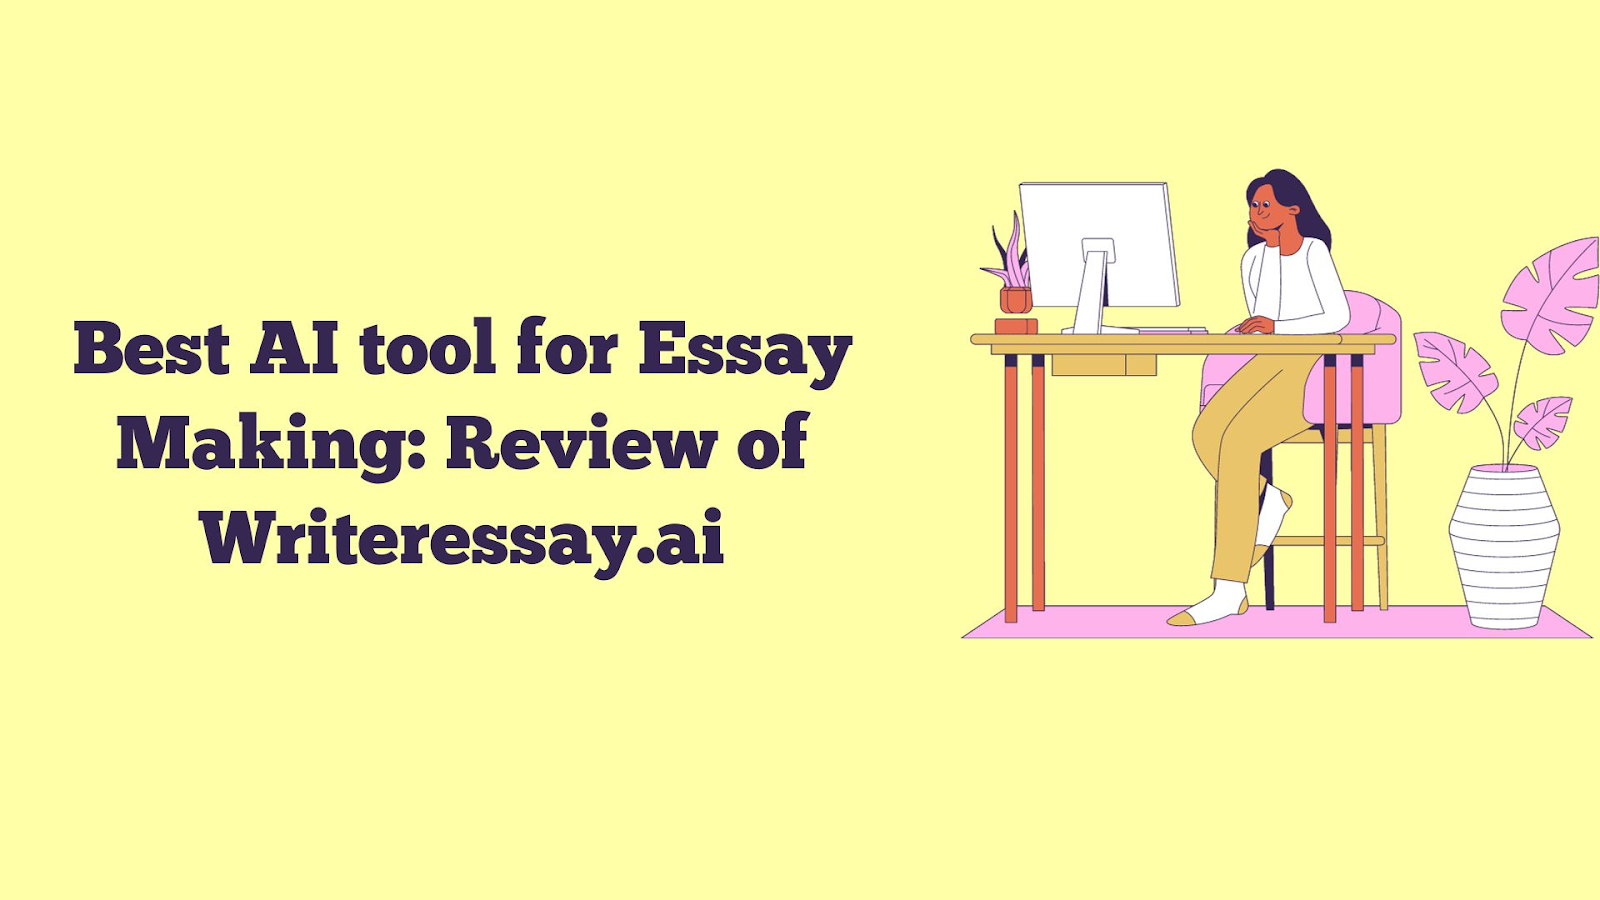 Best AI Tool for Essay Making